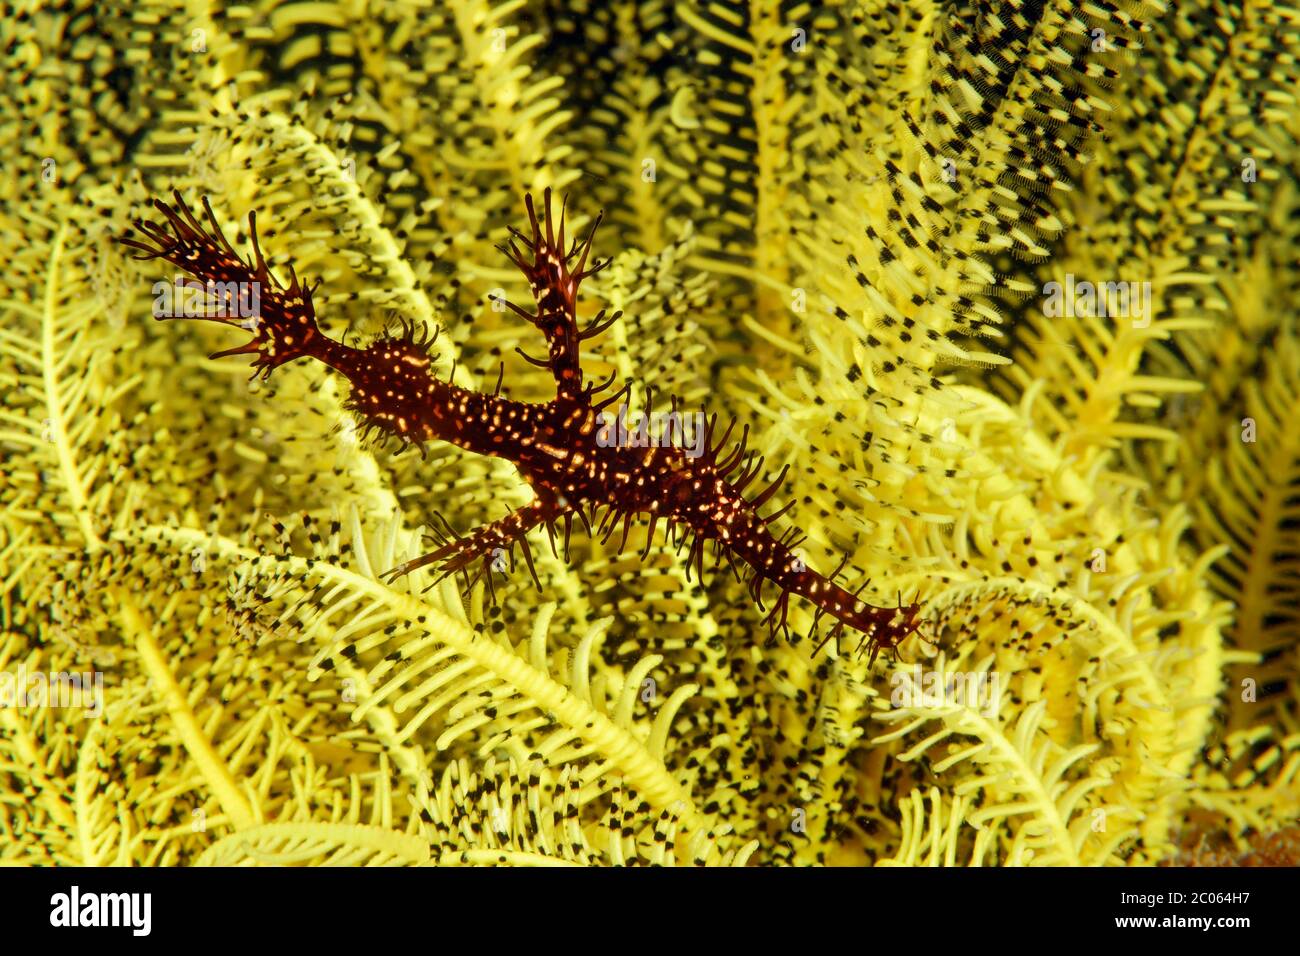 Ornate ghost pipefish (Solenostomus paradoxus) in Feather star (Crinoidea), Great Barrier Reef, Coral Sea, Pacific Ocean, Australia Stock Photo